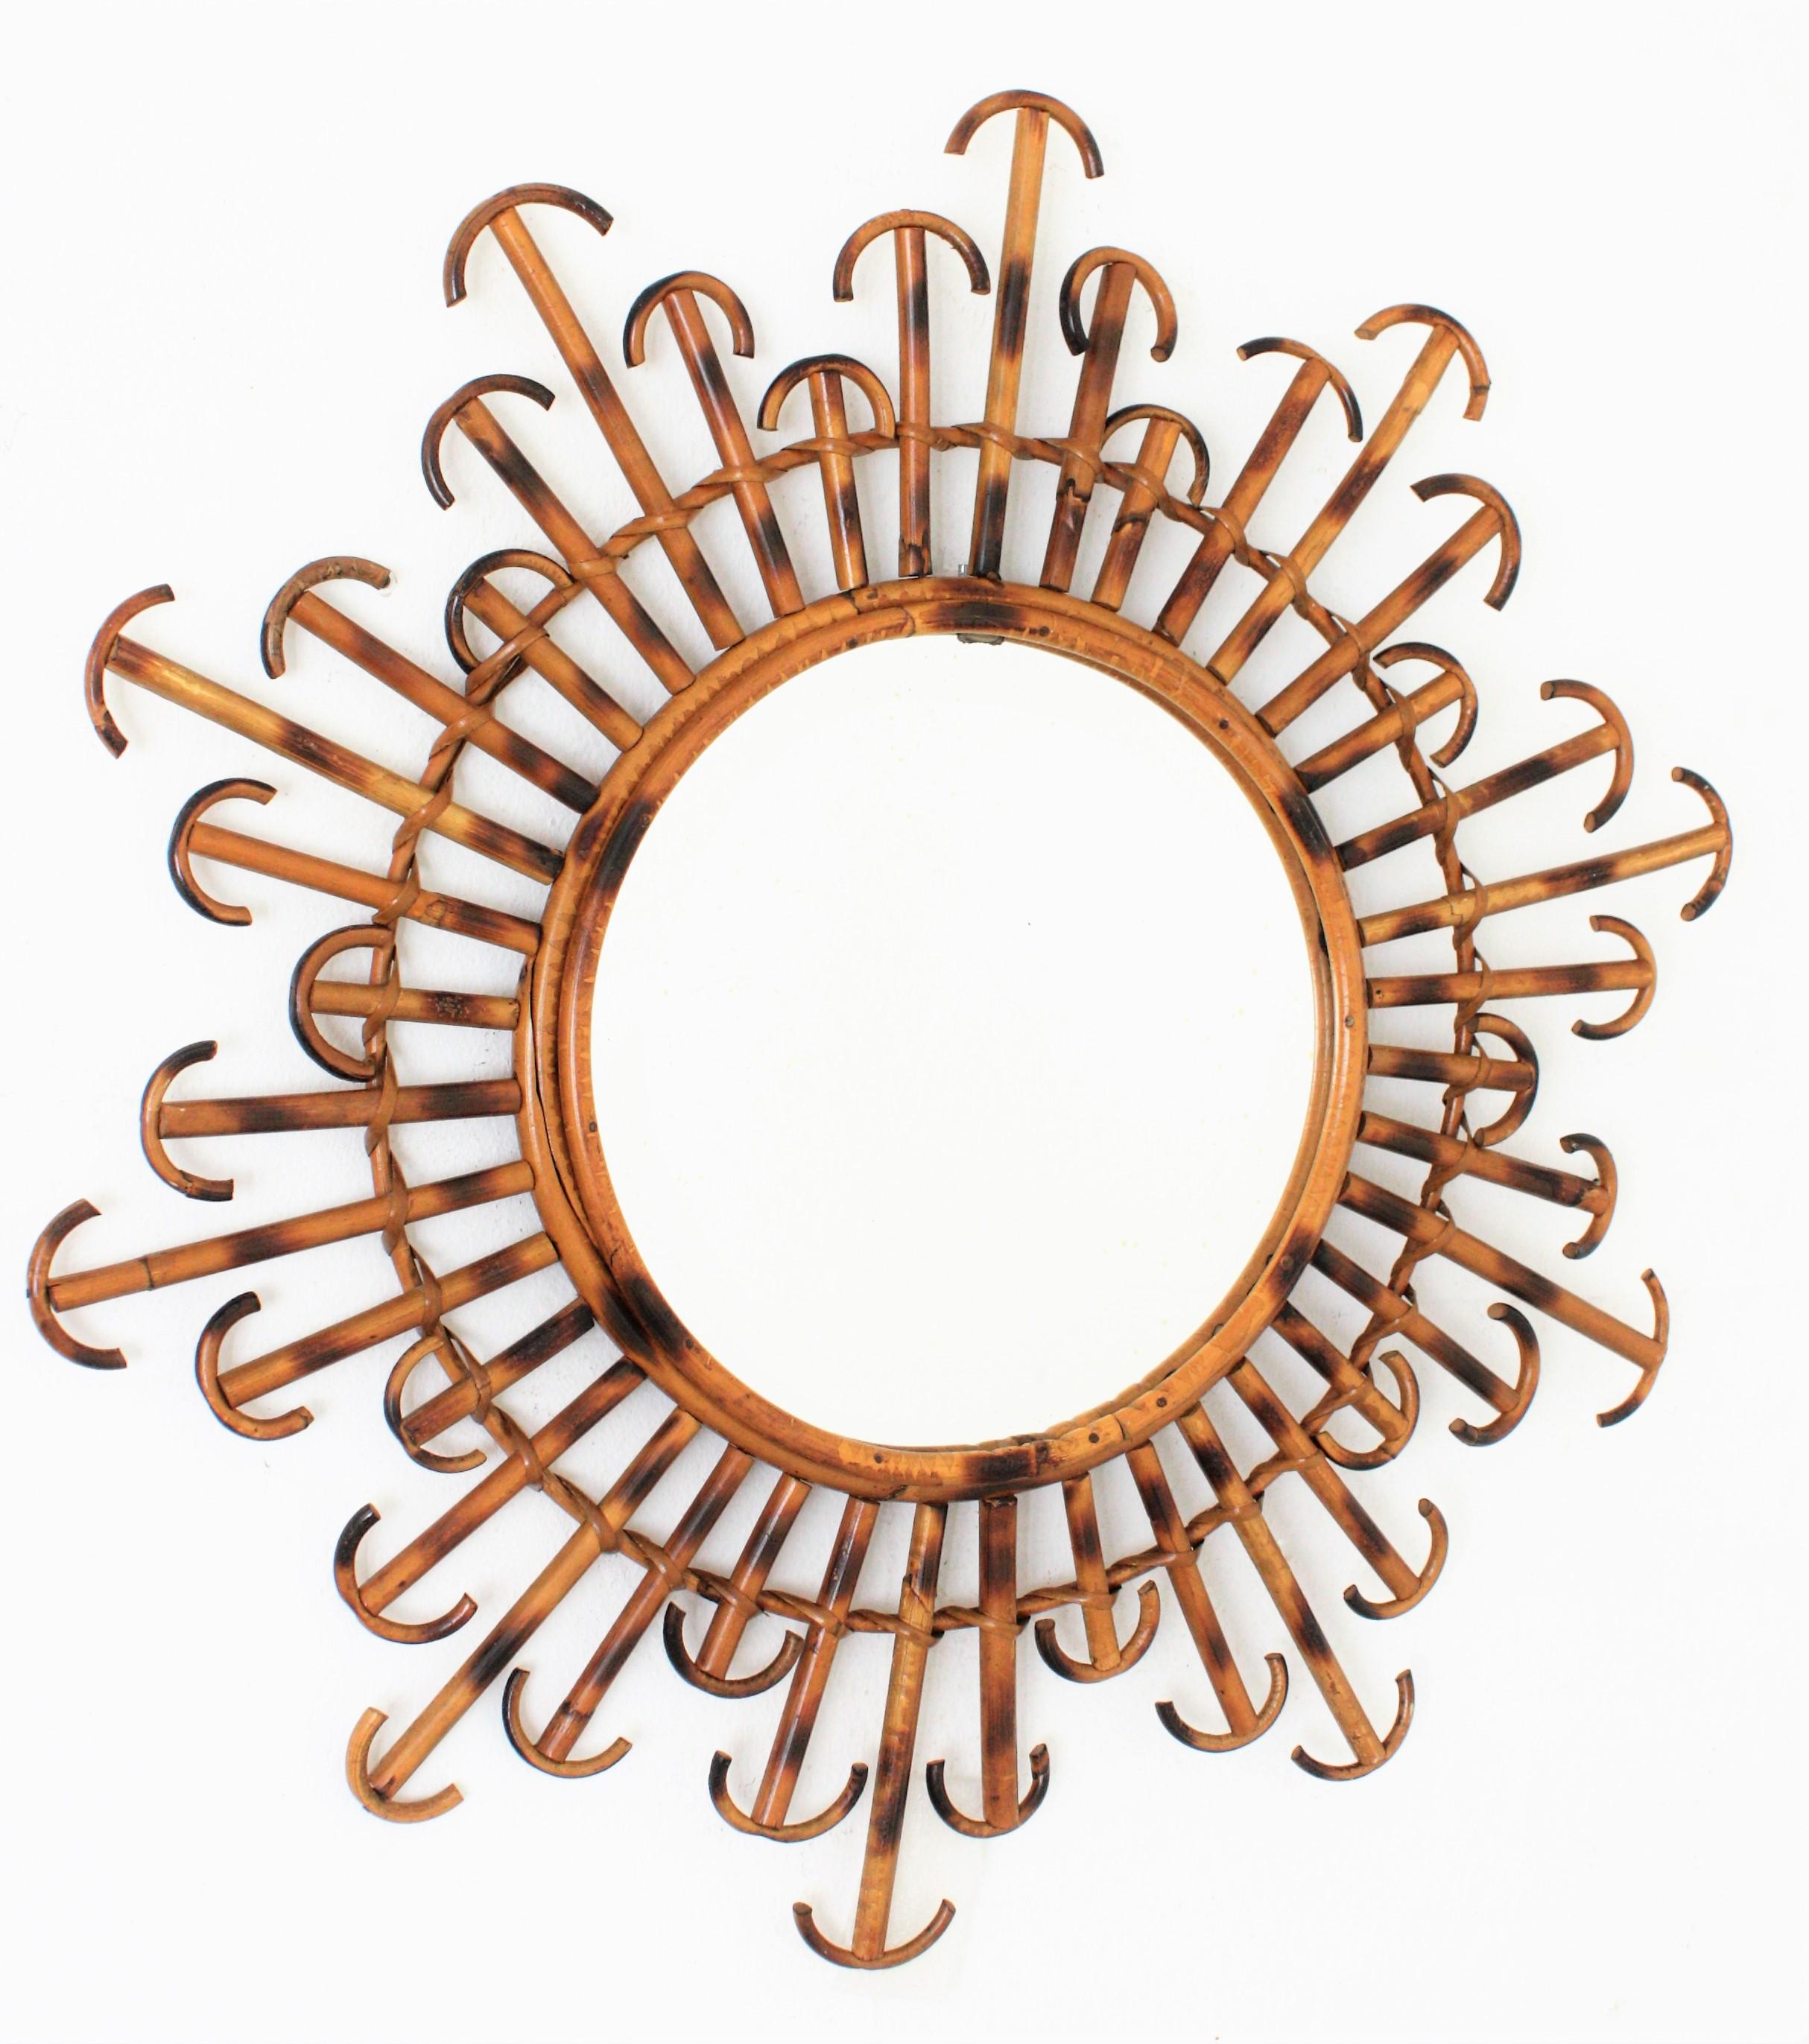 A lovely flower burst or sunburst mirror handcrafted with rattan and wicker with pyrography decorations and curved endings. France, 1950s.
This mirror has three layers of alternating rays in different sizes. Beautiful to place it alone, but also